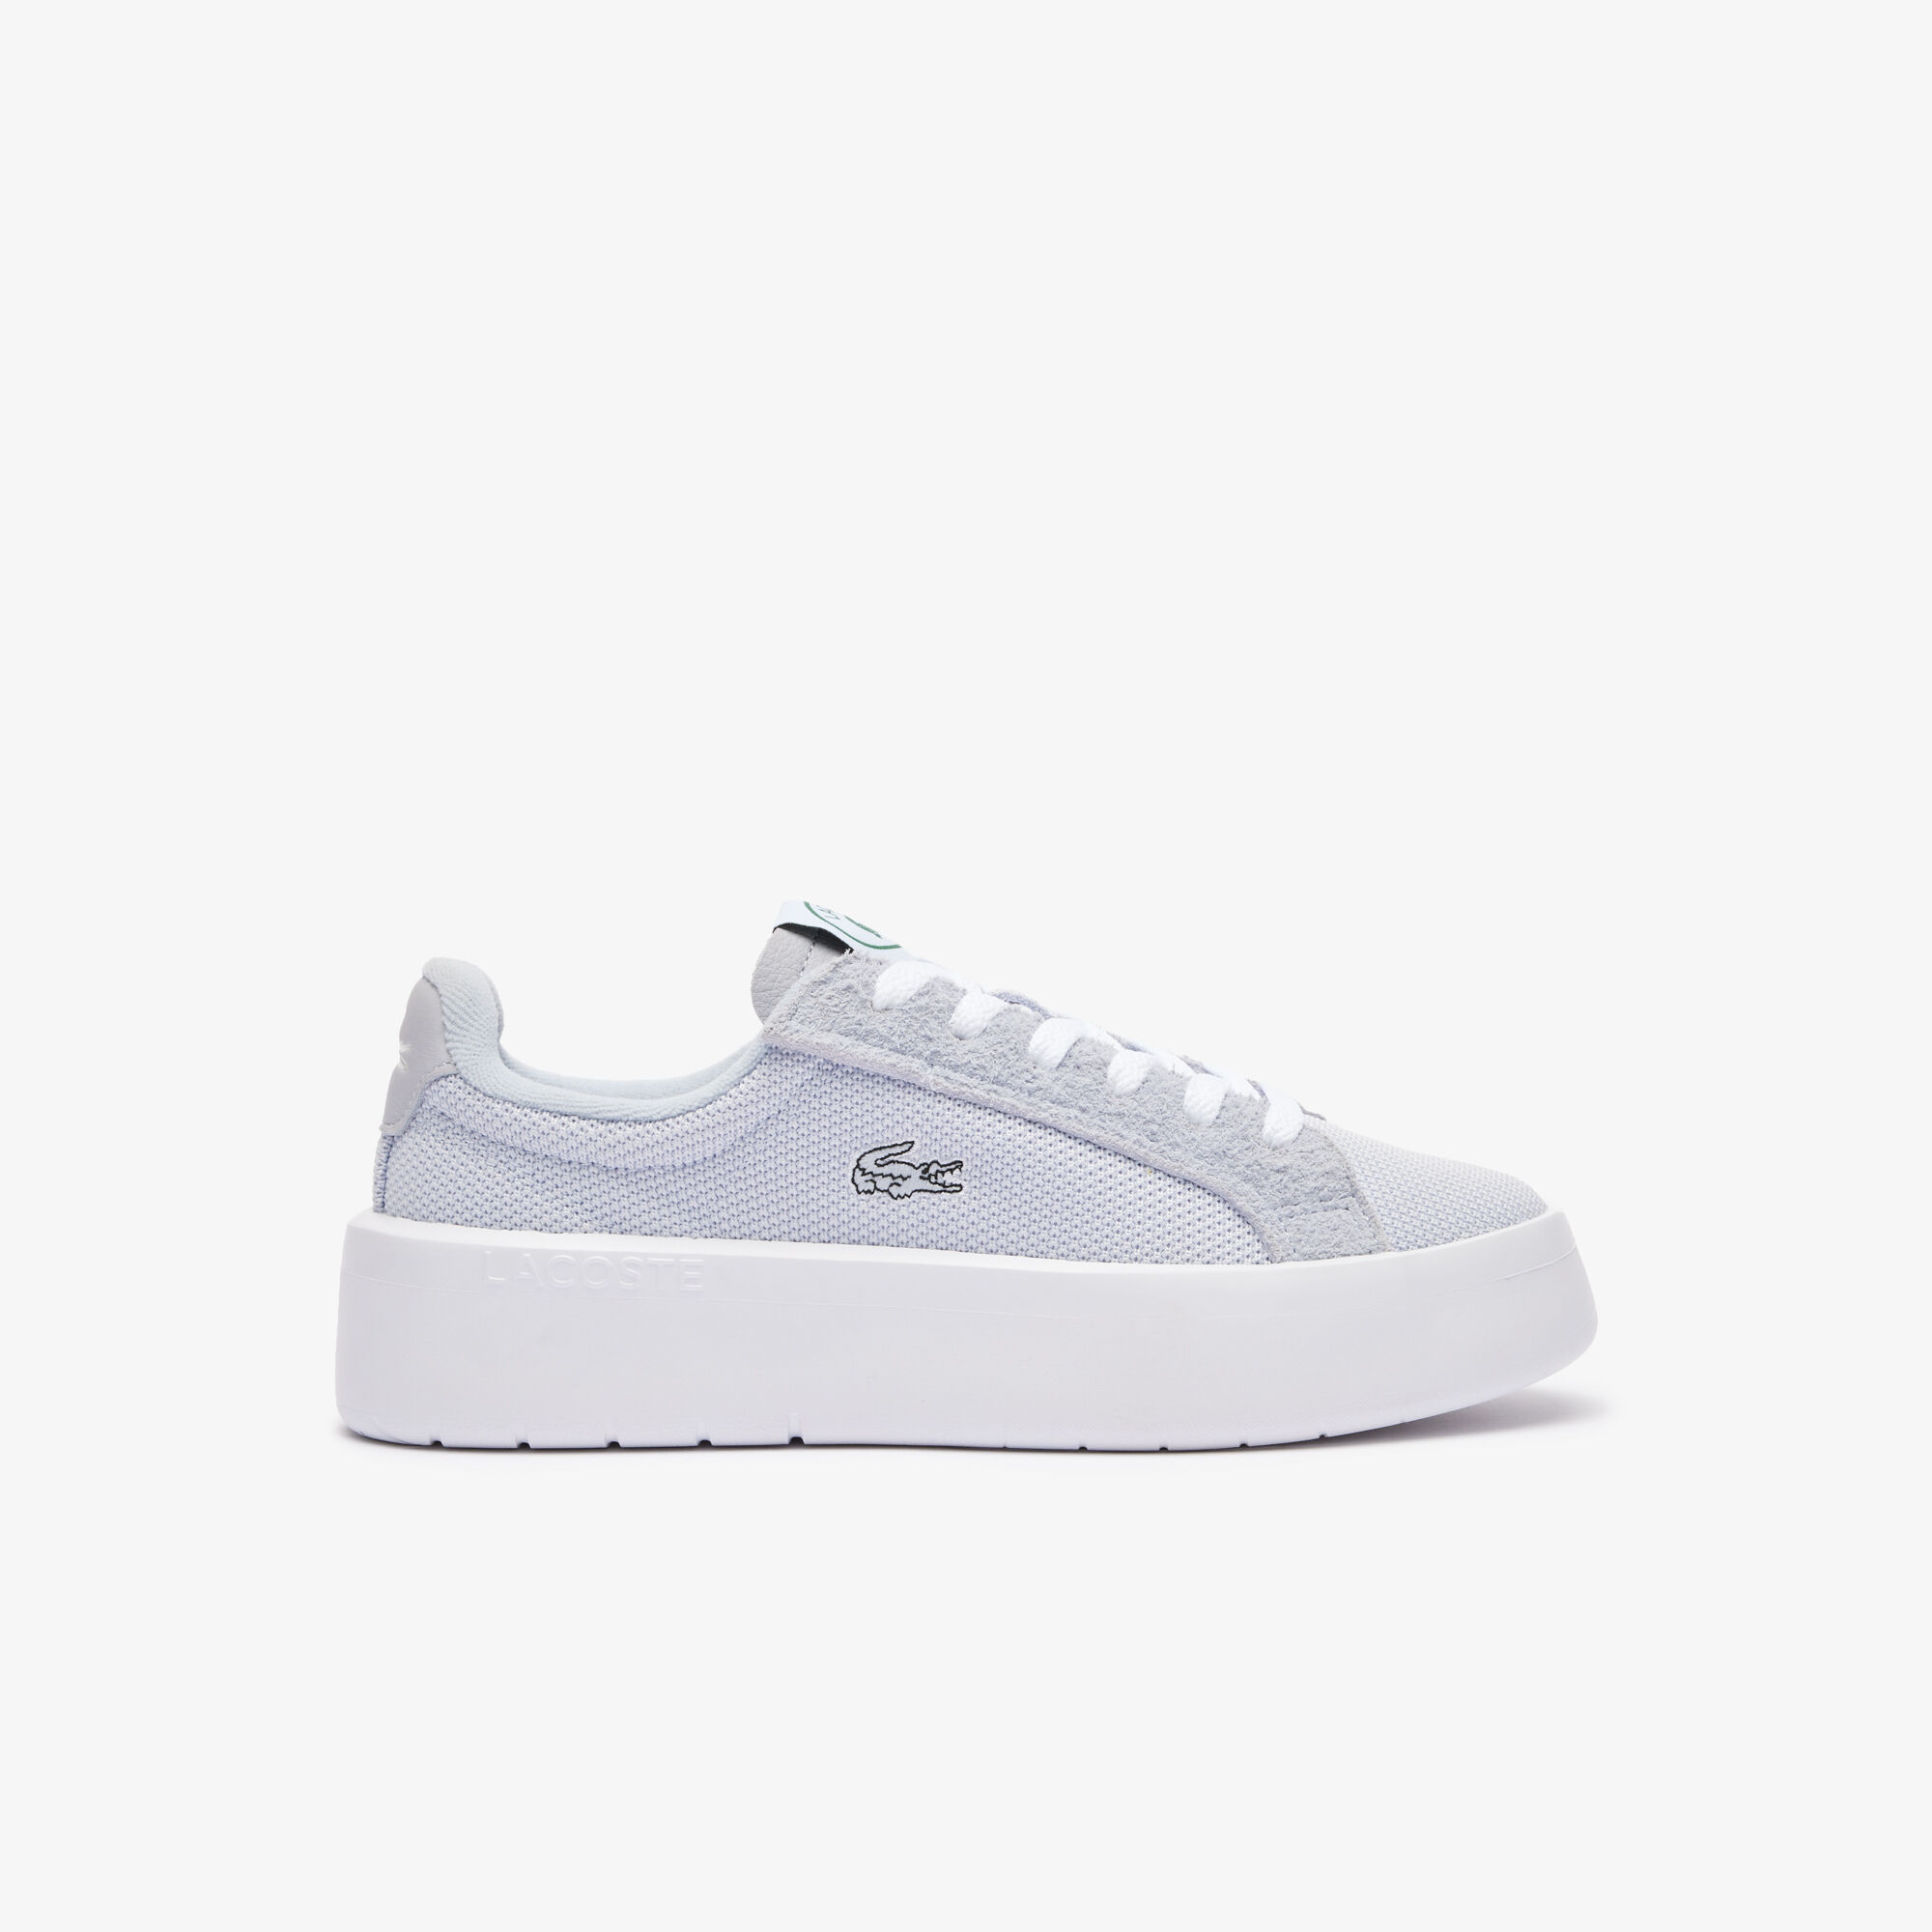 La Favorita - Calling all sneaker lovers 🤩 Shop women's @lacoste sneakers  in-stores & online! #funfashion #traveloutfit #fridayfashion #shoesforhim  #shoesforher #menstyles #worldfashion #fashionbags #fashiongo #instastyles  #fashionaddicts #favstyle ...